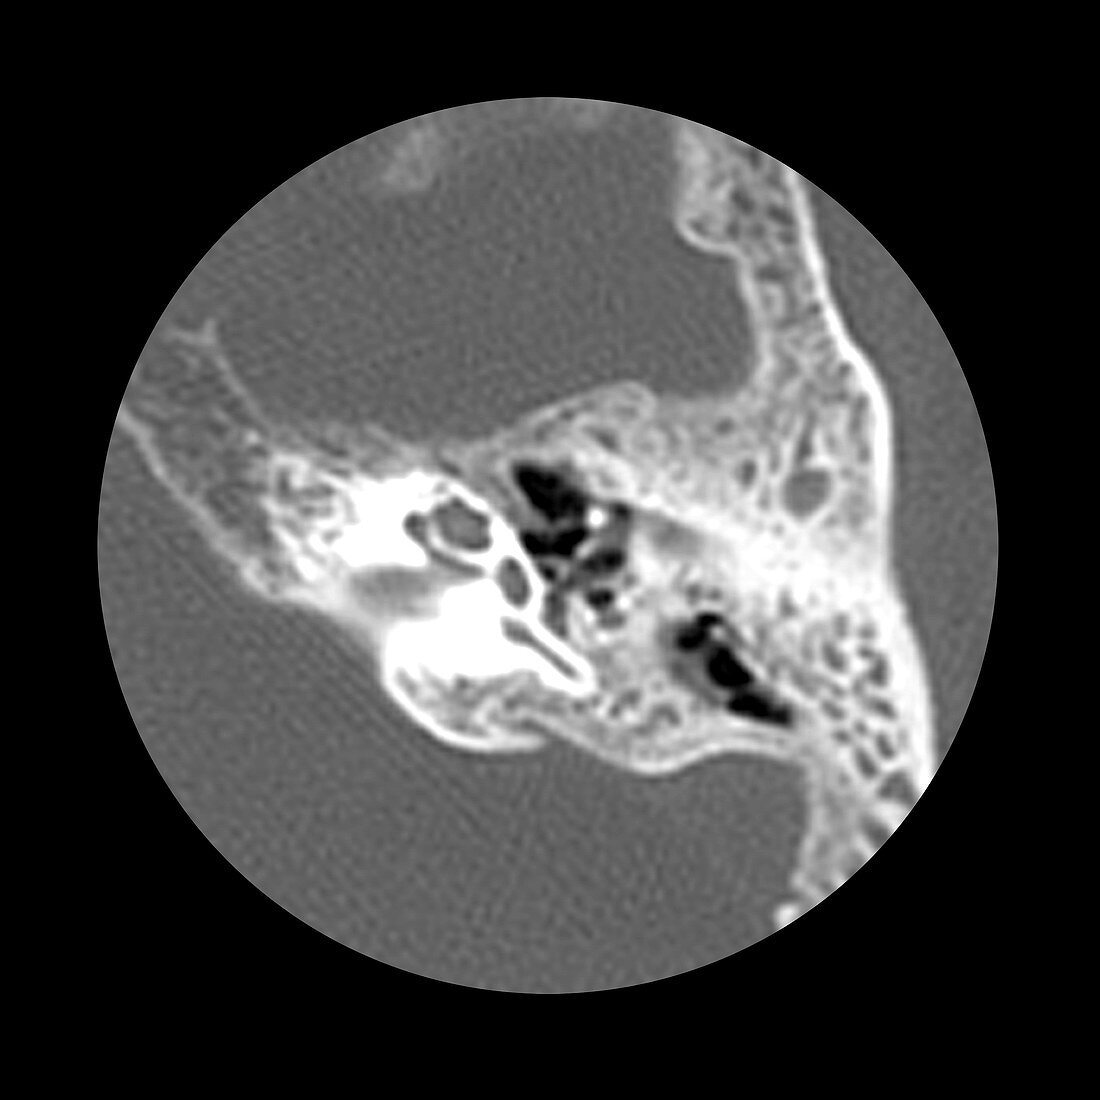 Temporal Bone and Inner Ear Structures